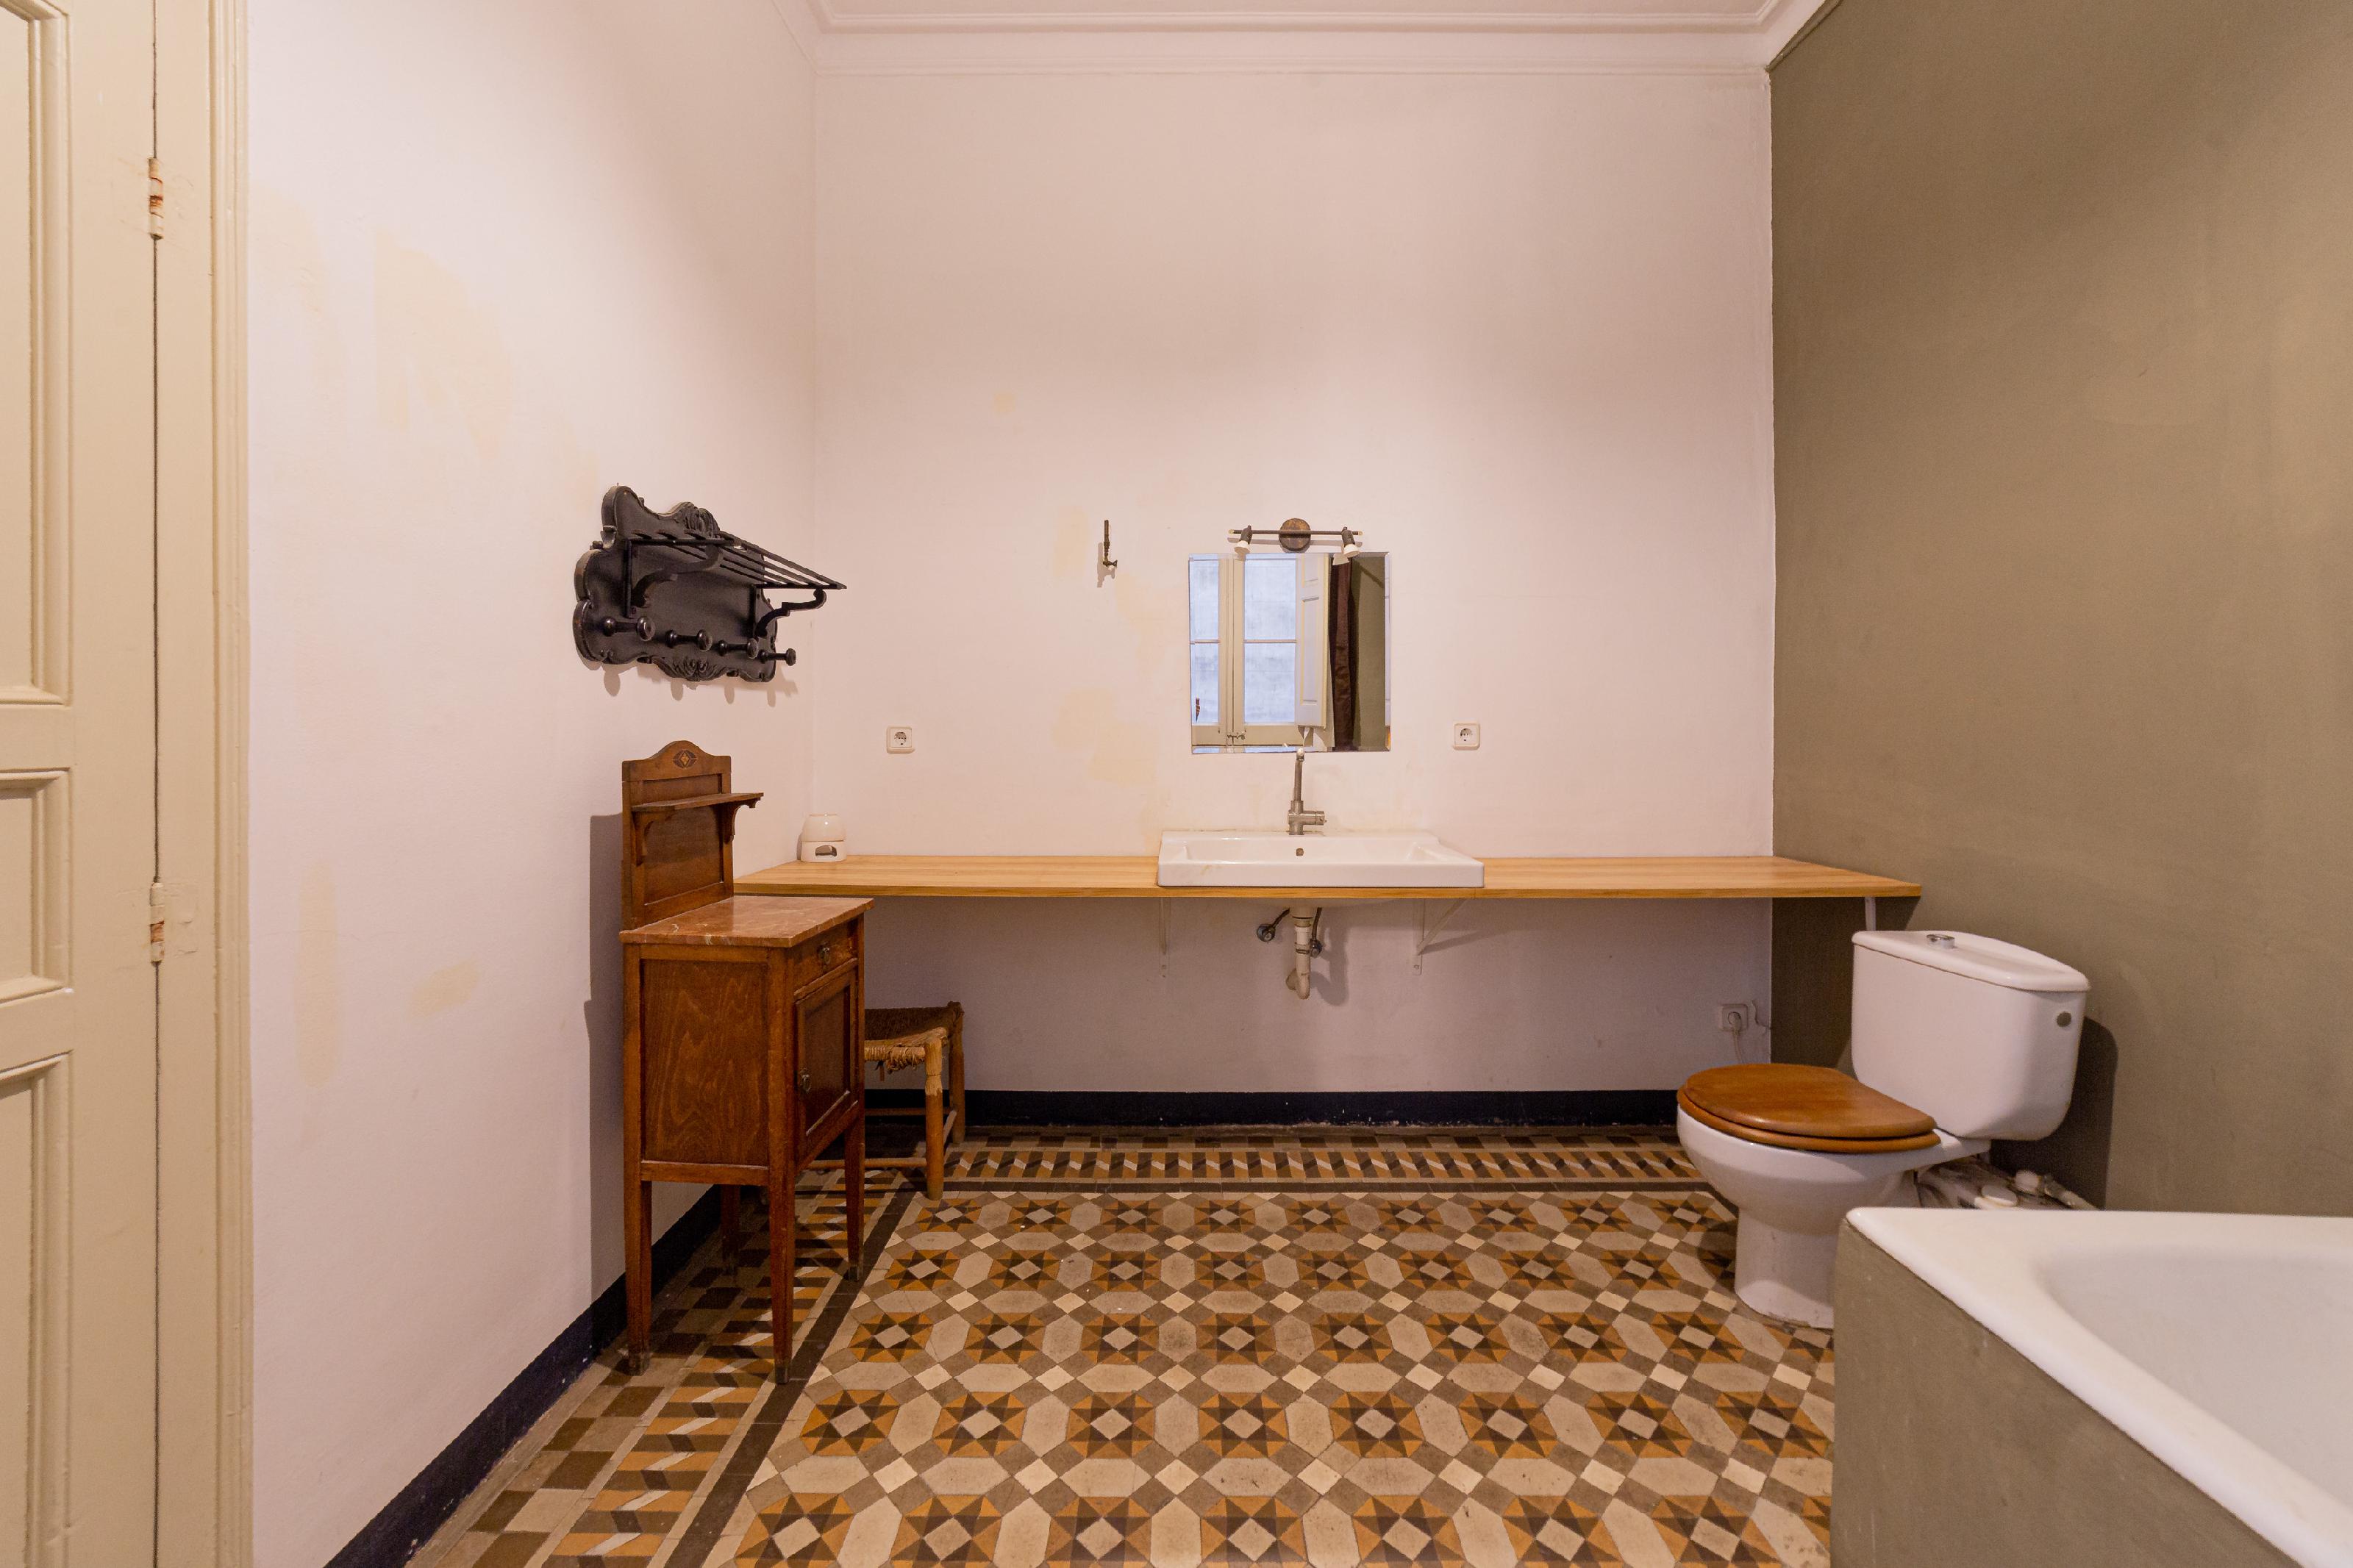 273416 Flat for sale in Eixample, Old Esquerre Eixample 15